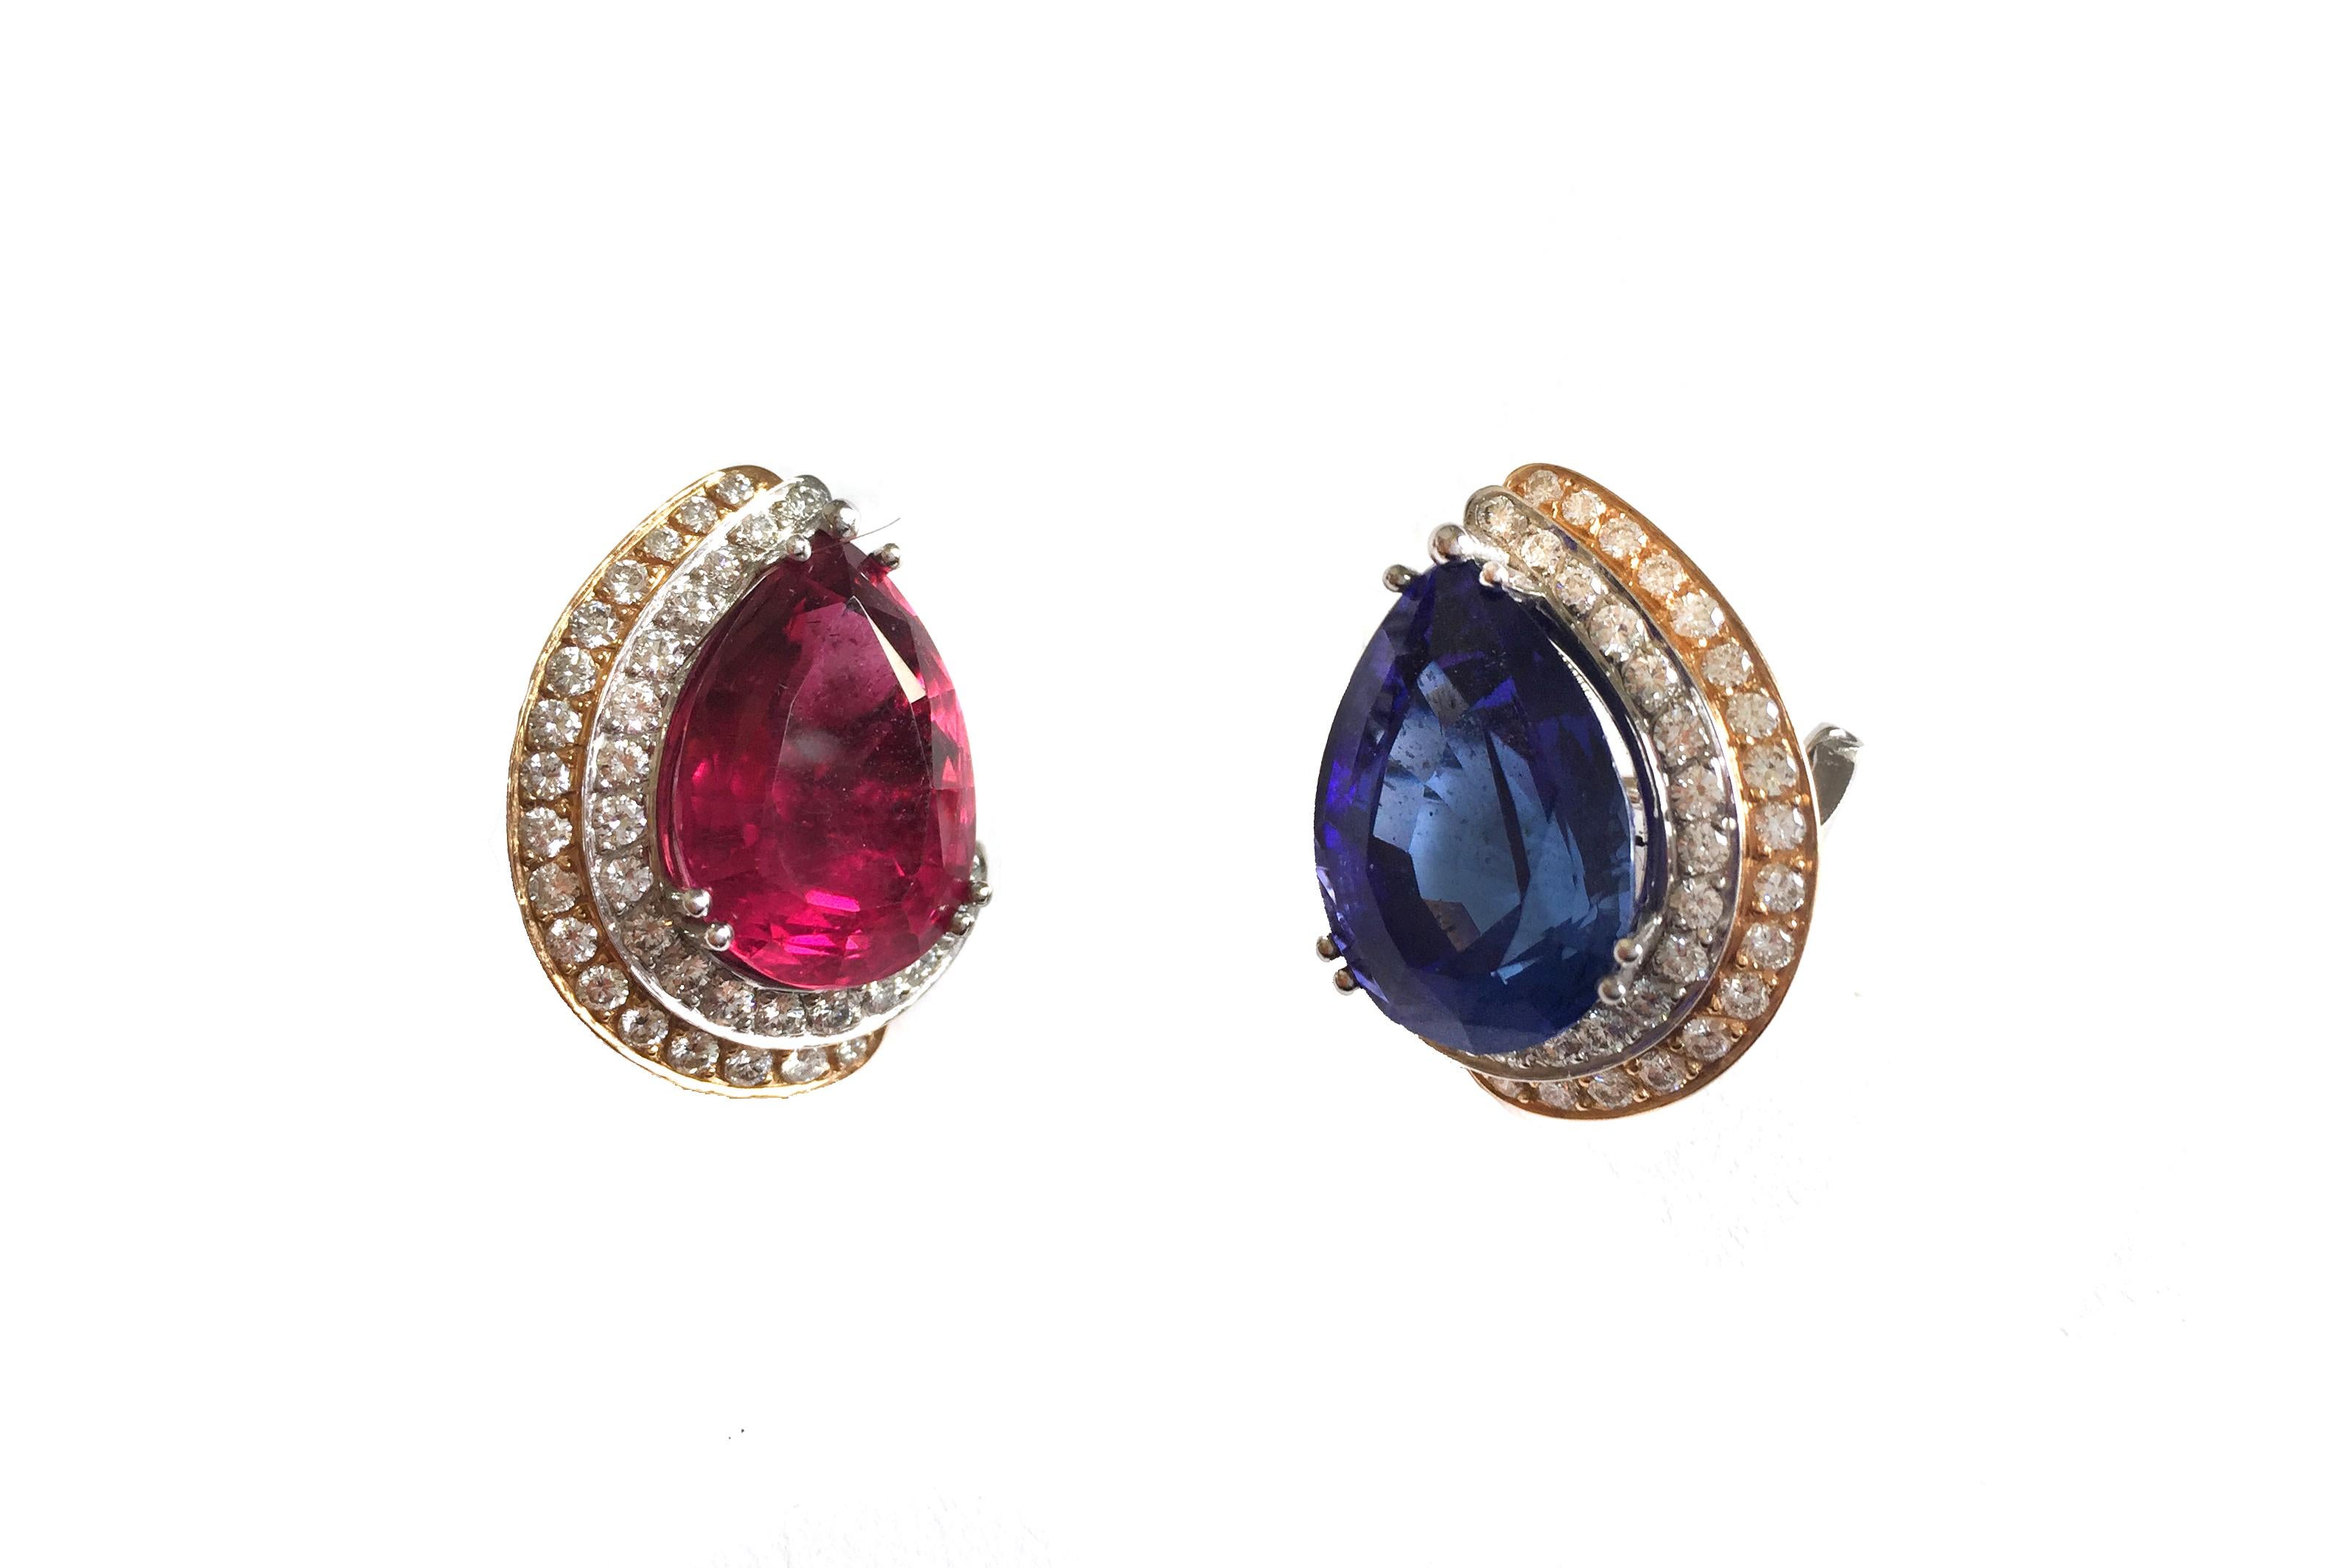 A pair of rubellite, tanzanite, diamond, and 18 karat yellow and rose gold earclips, by Paul Binder, 1988.

The earrings measure .6